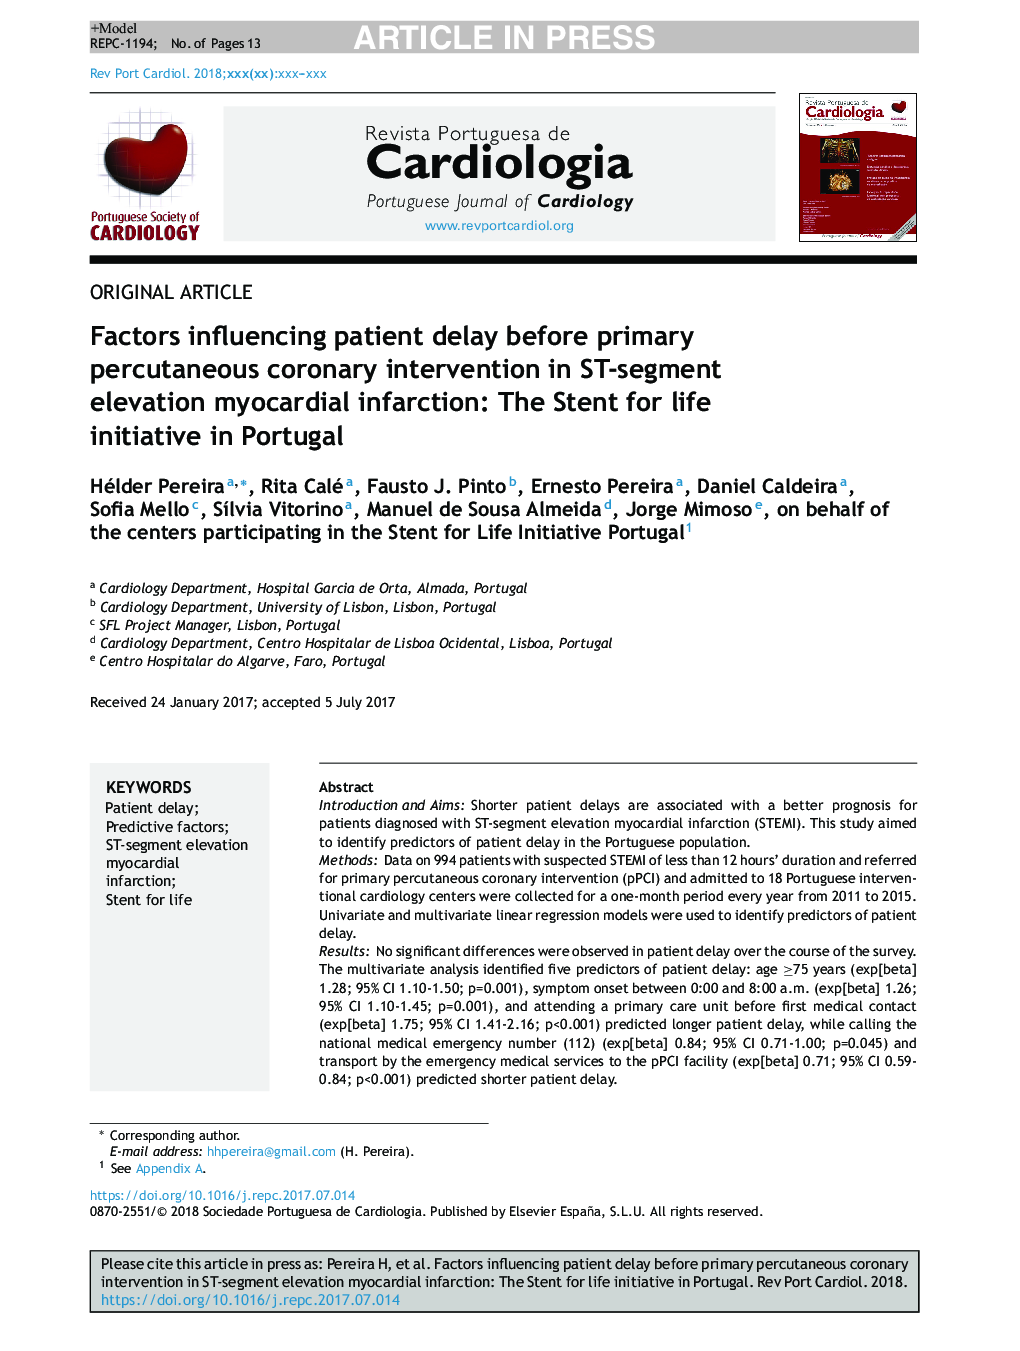 Factors influencing patient delay before primary percutaneous coronary intervention in ST-segment elevation myocardial infarction: The Stent for life initiative in Portugal